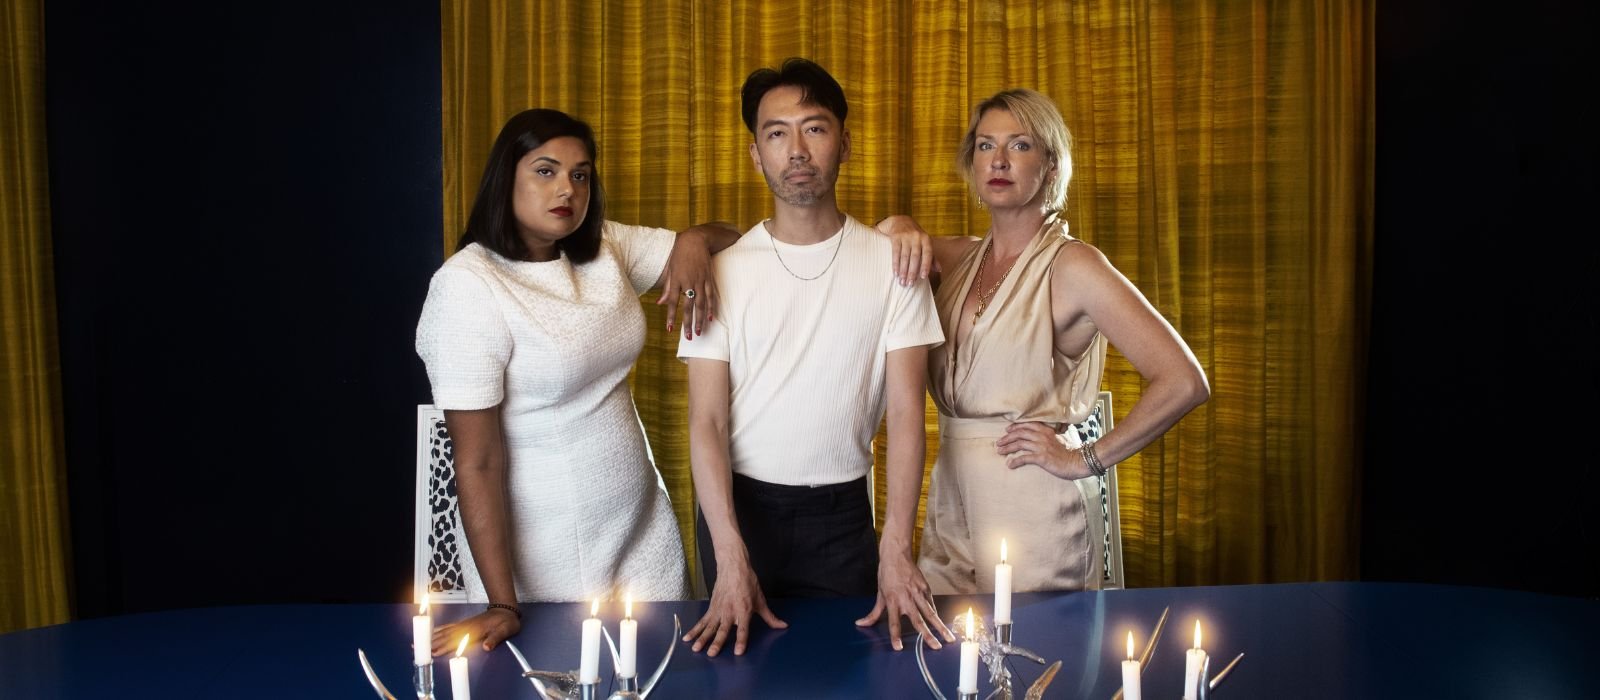 Three comedians stand with their arms around each other, with a gold curtain in the background and table with lit candles in the foreground.